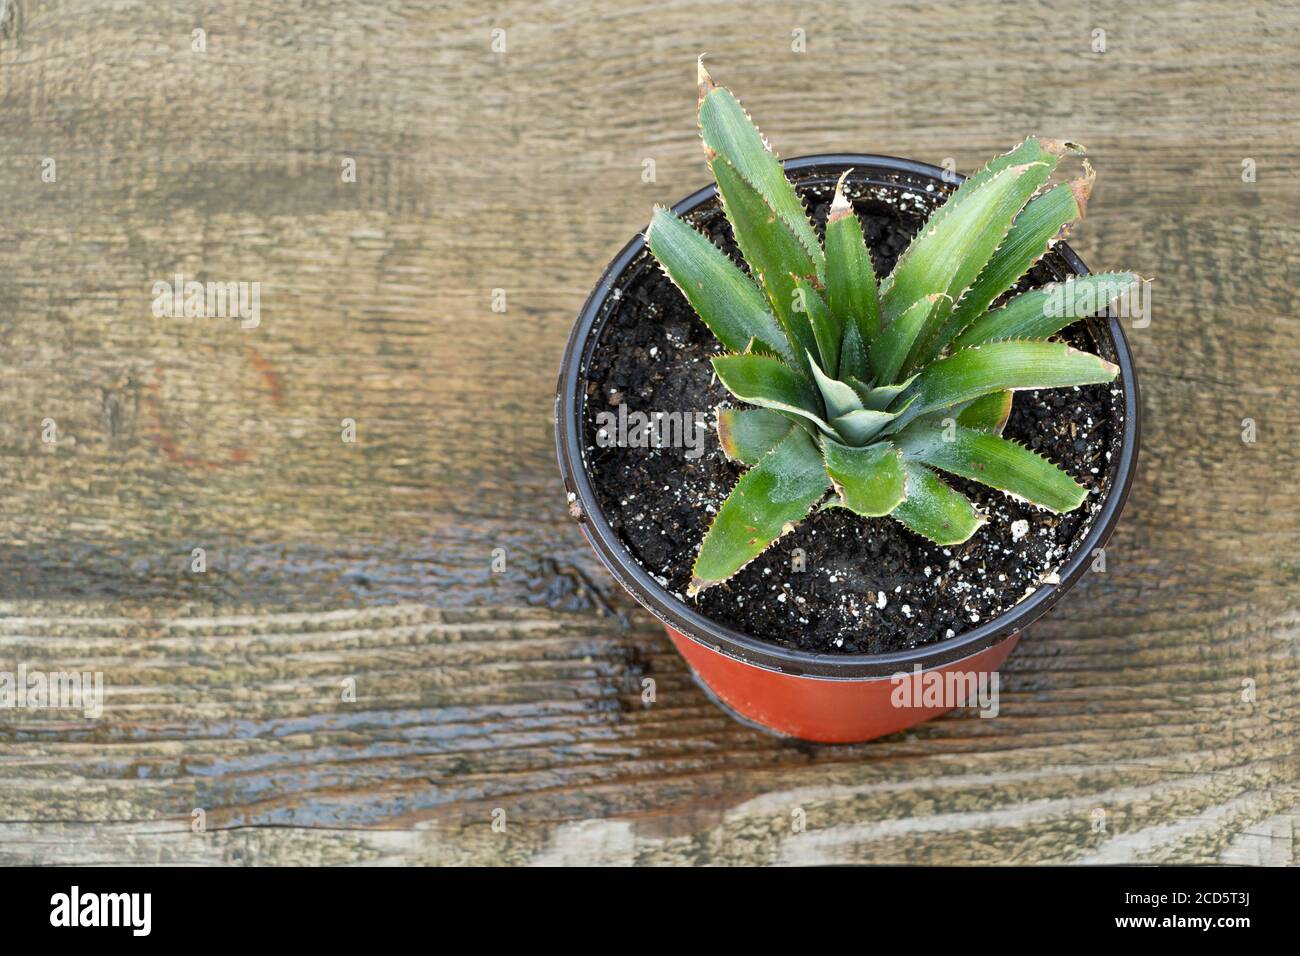 Pineapple in pot, how to grow pineapple at home concept. Stock Photo